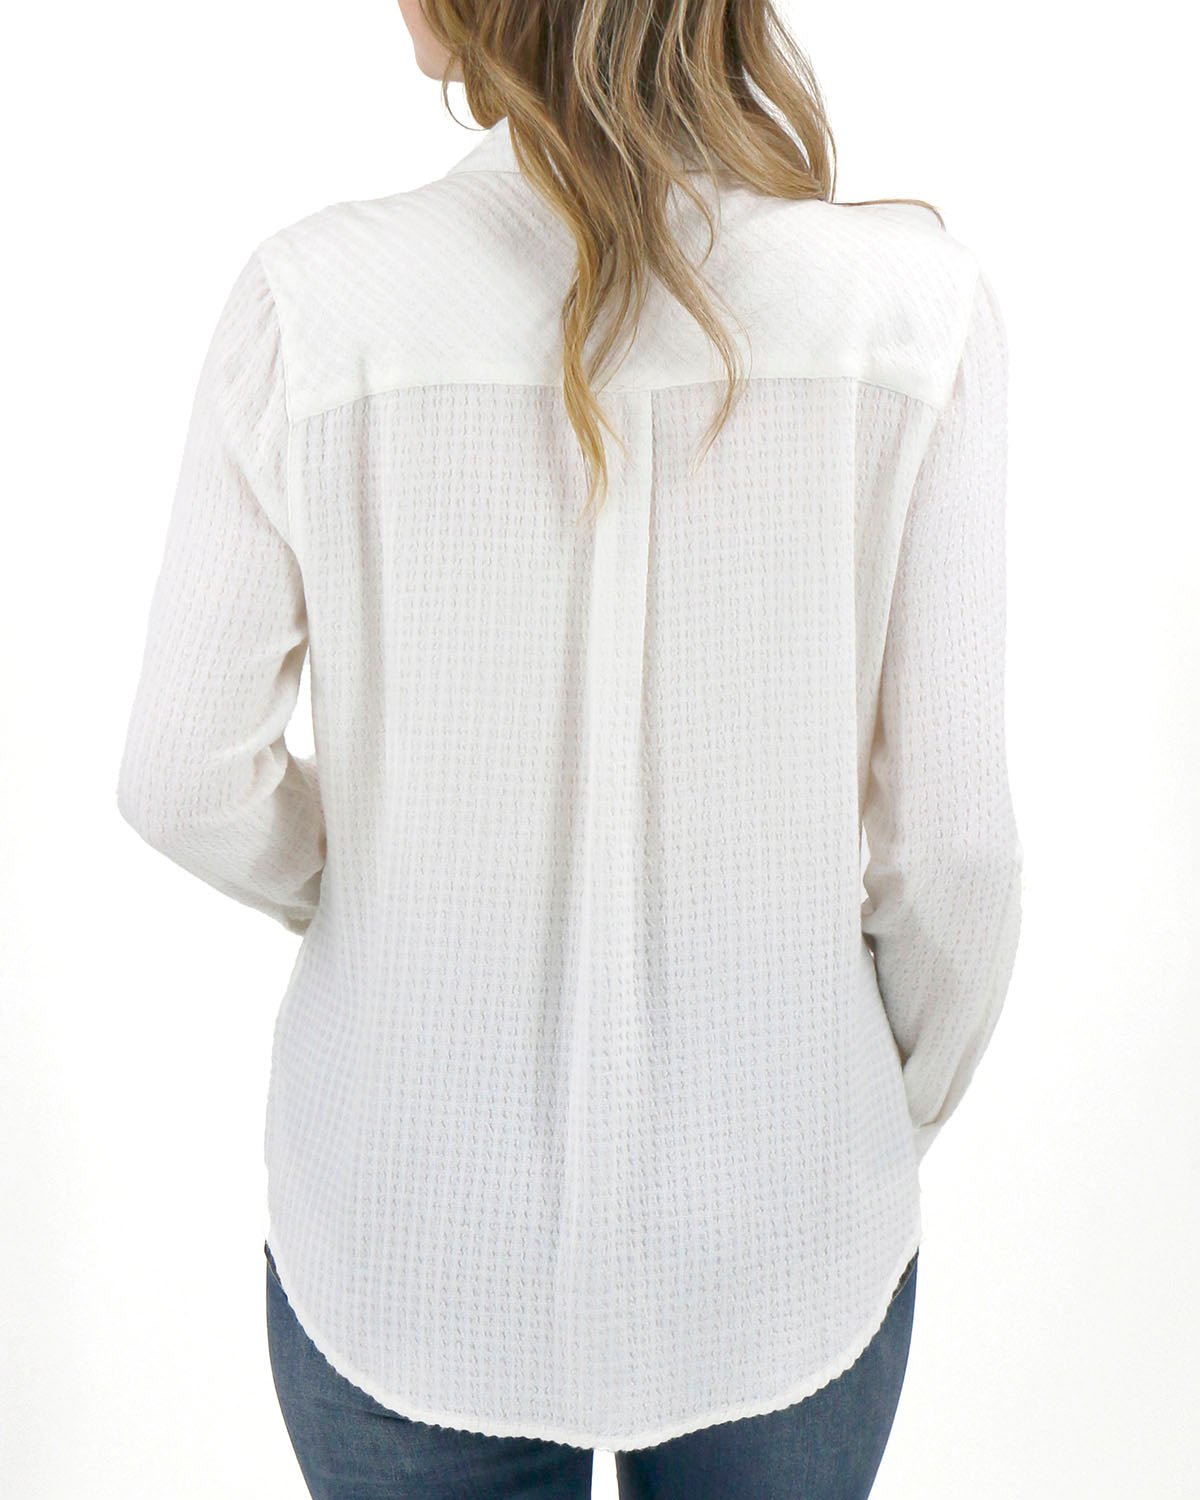 Favorite Button Up Top in Soft White